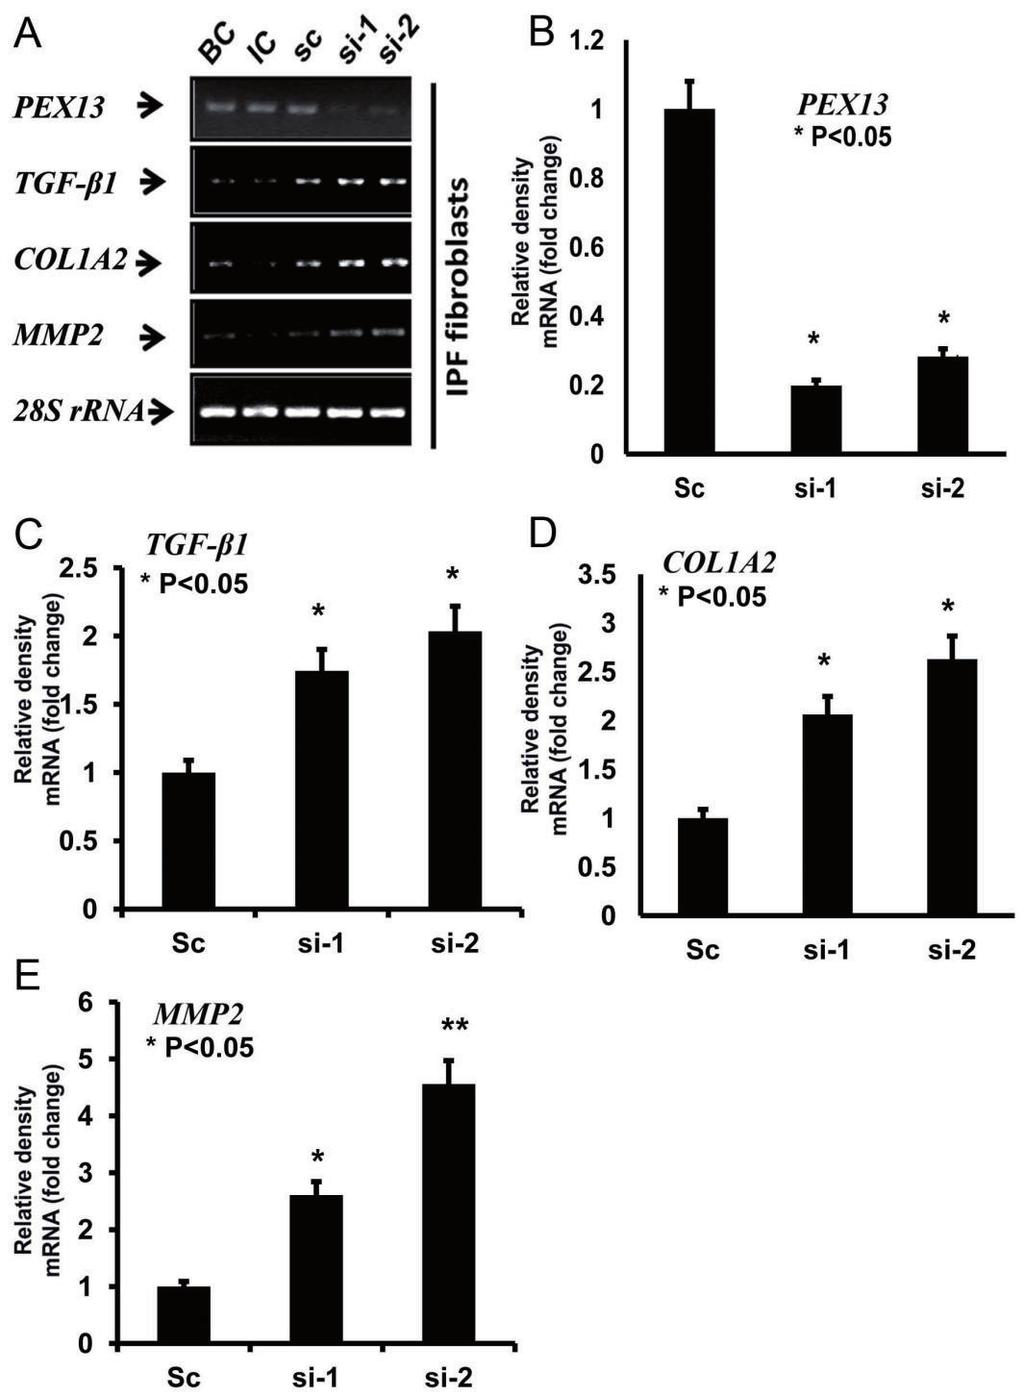 Fig. 17. Increased fibrotic response and elevated MMP2 mrna in PEX13 knockdown of IPF fibroblasts. (A) Expression of PEX13, TGF- 1, COL1A2 and MMP2 at mrna level shown by RT-PCR in IPF fibroblasts.